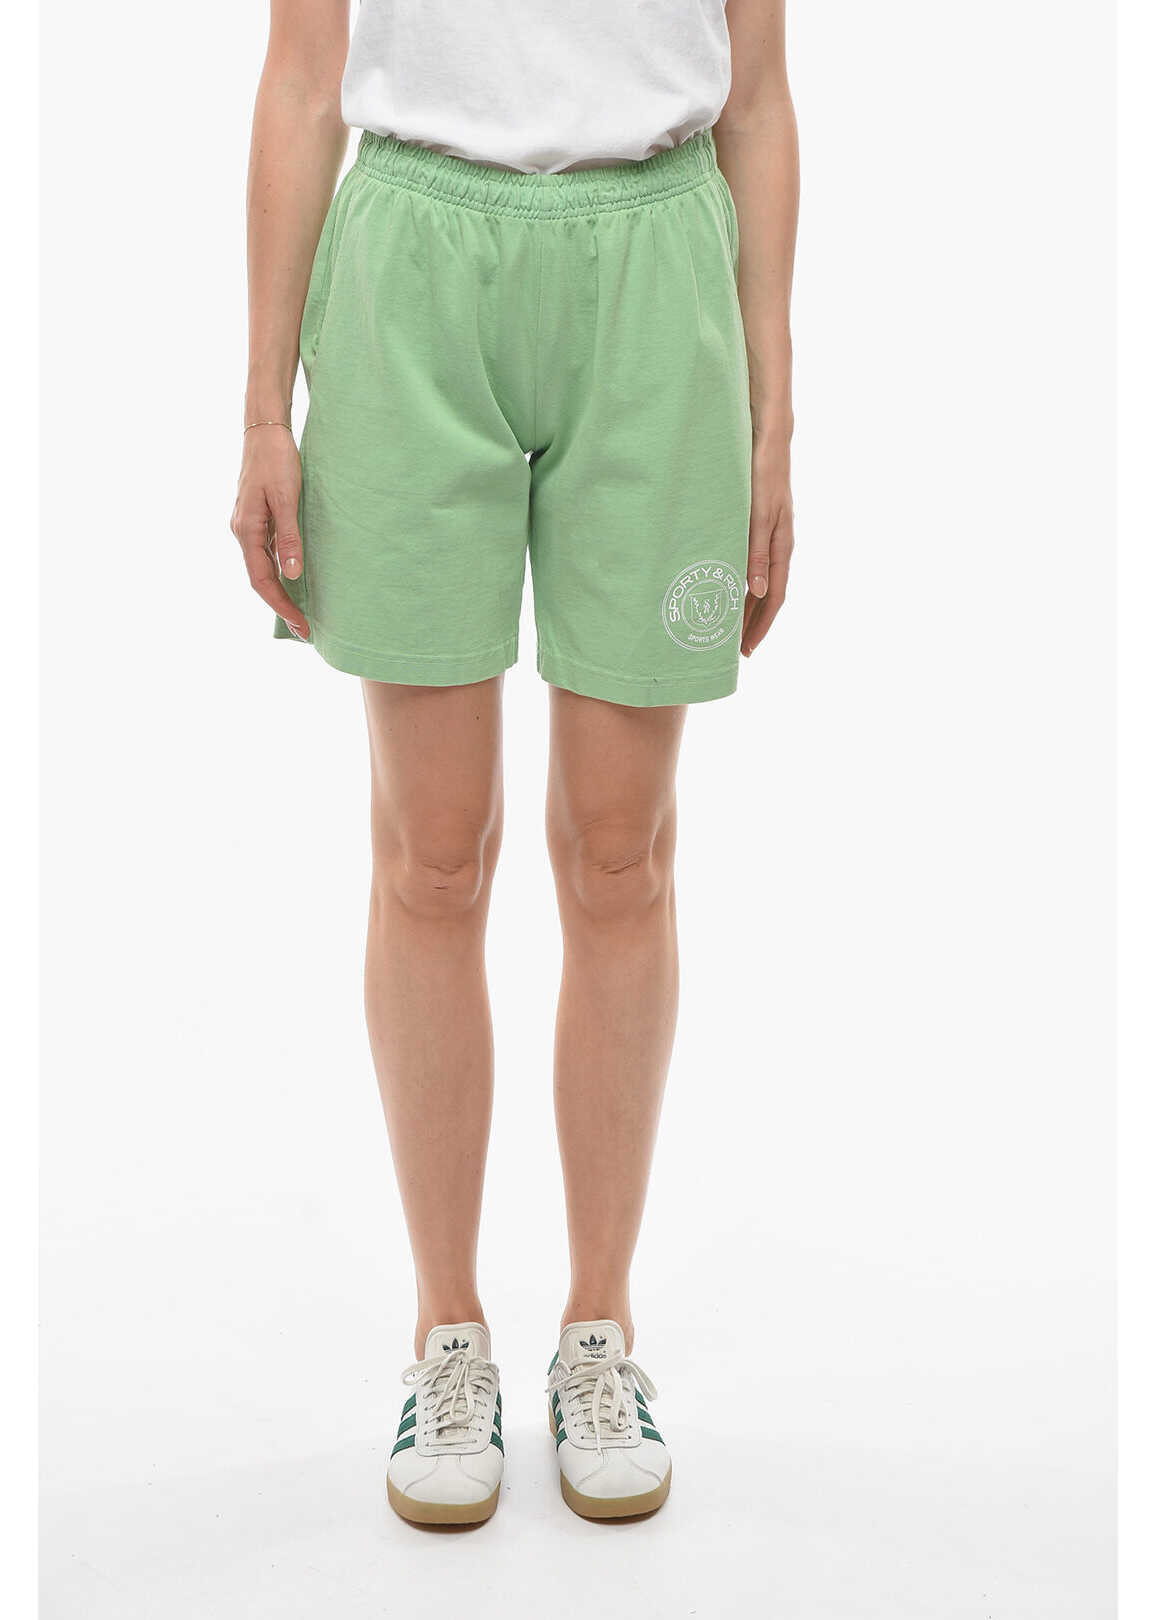 SPORTY & RICH Solid Color Cotton Shorts With Printed Contrasting Logo Green